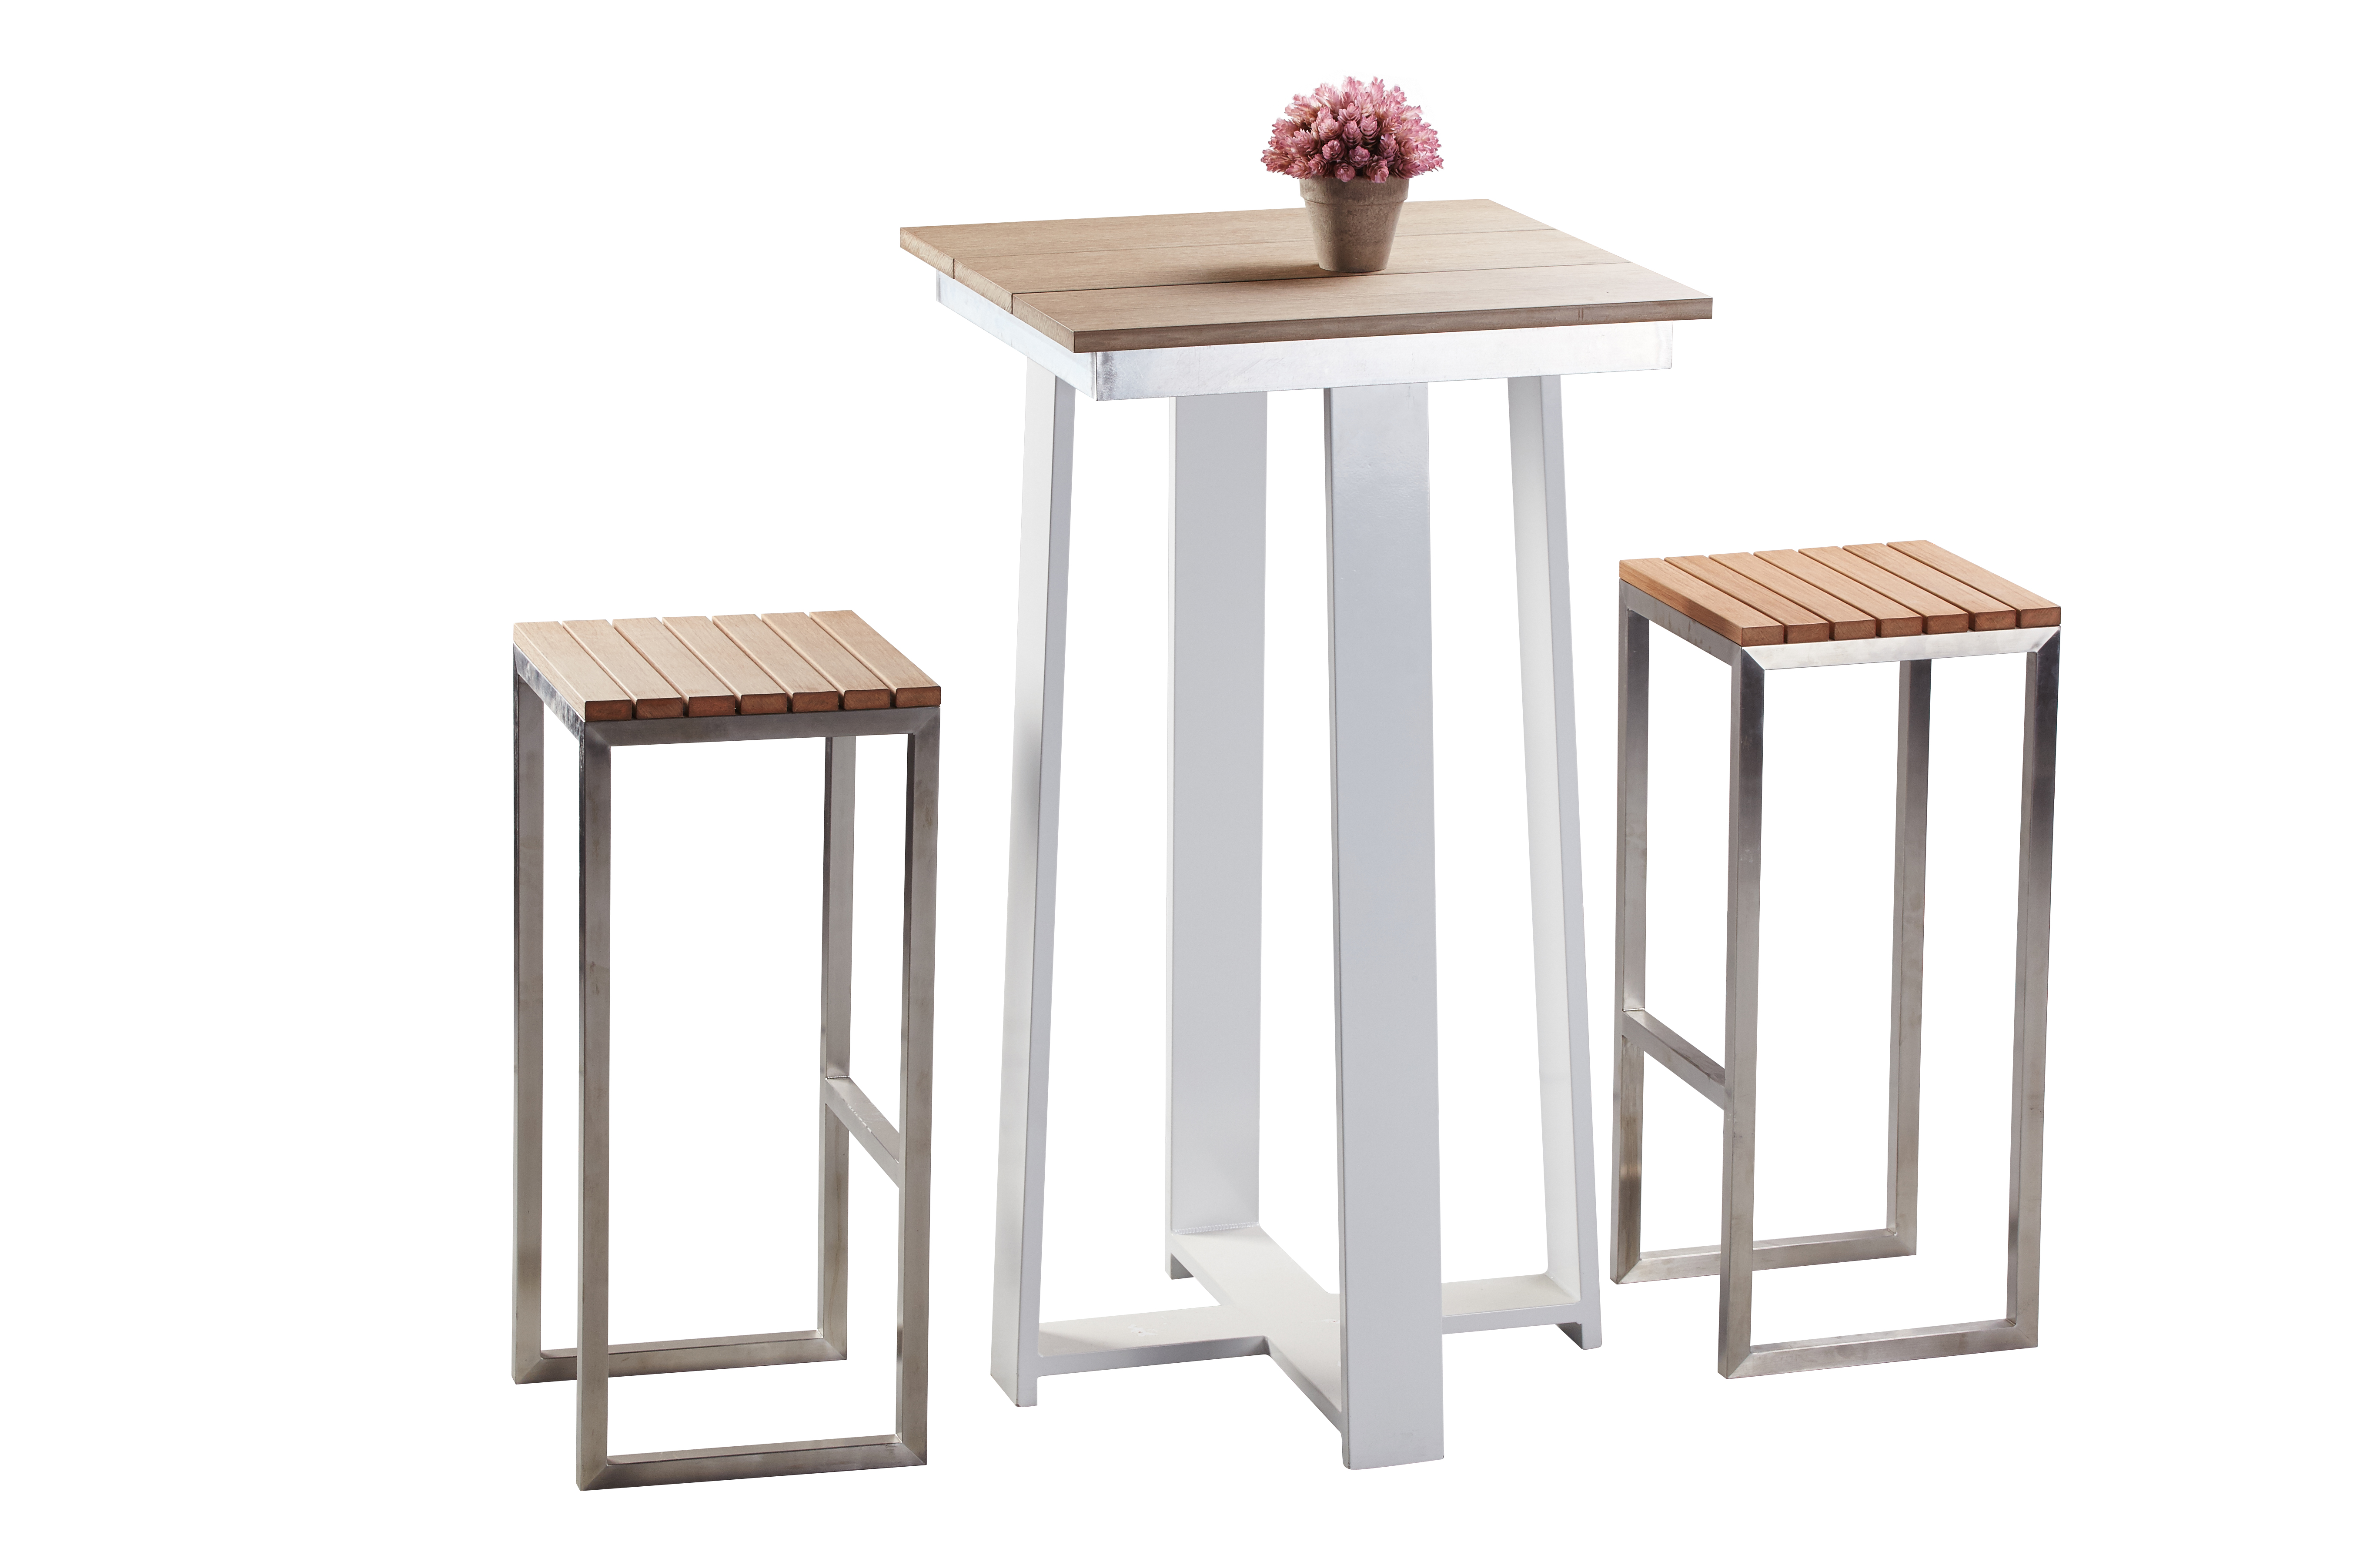 Cheapest Outdoor Furniture Polywood bar table and bar chair Wholesale Price